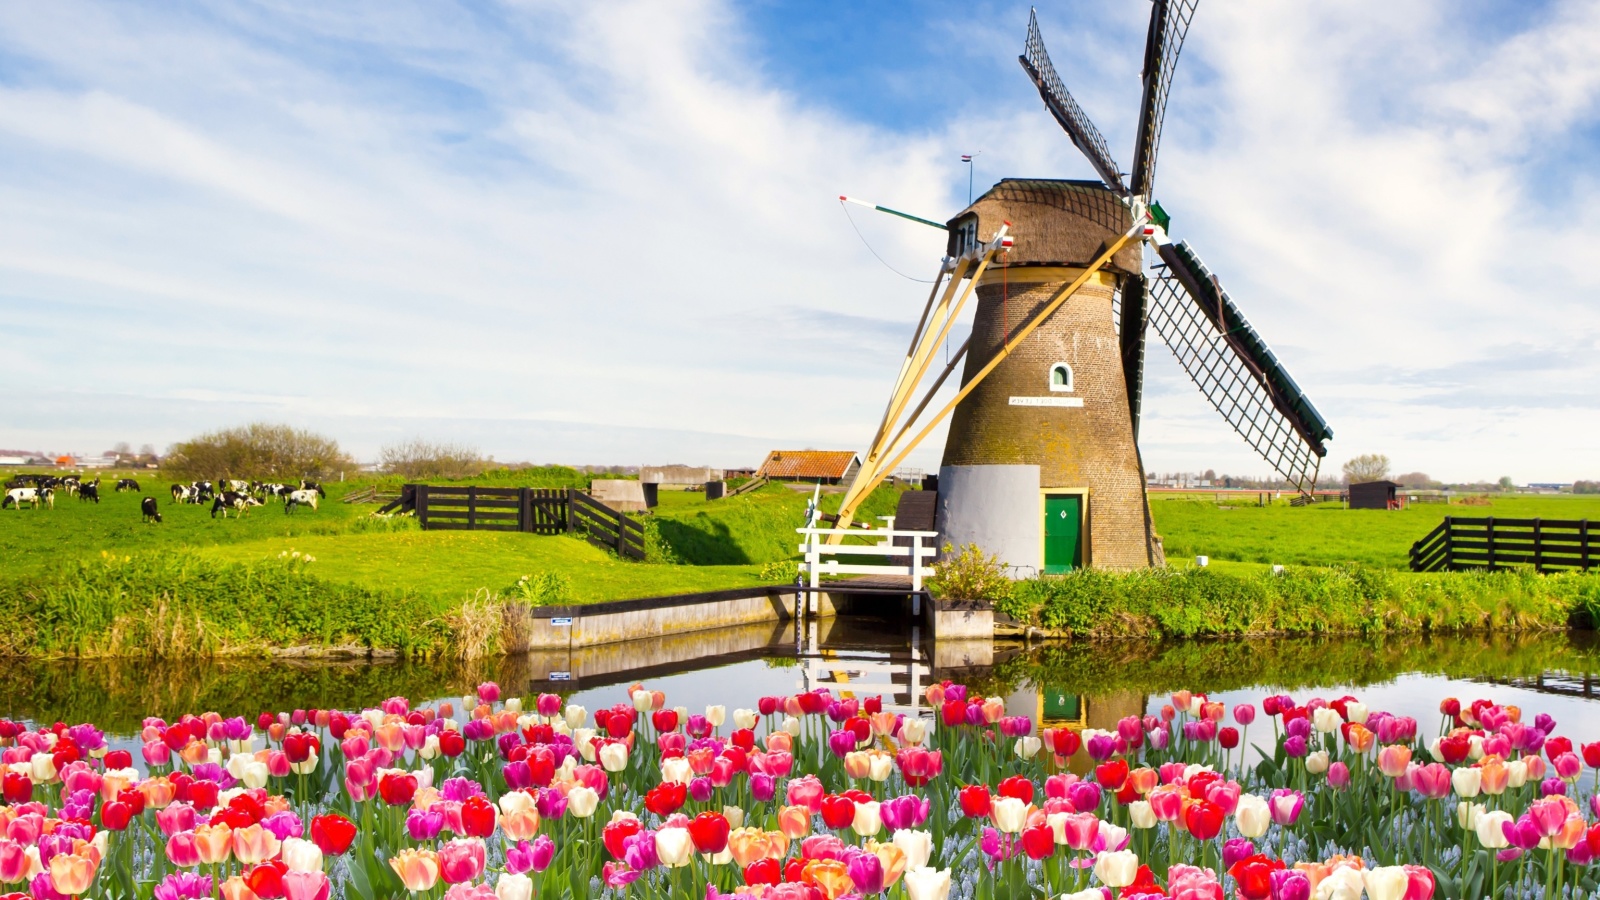 Mill and tulips in Holland wallpaper 1600x900